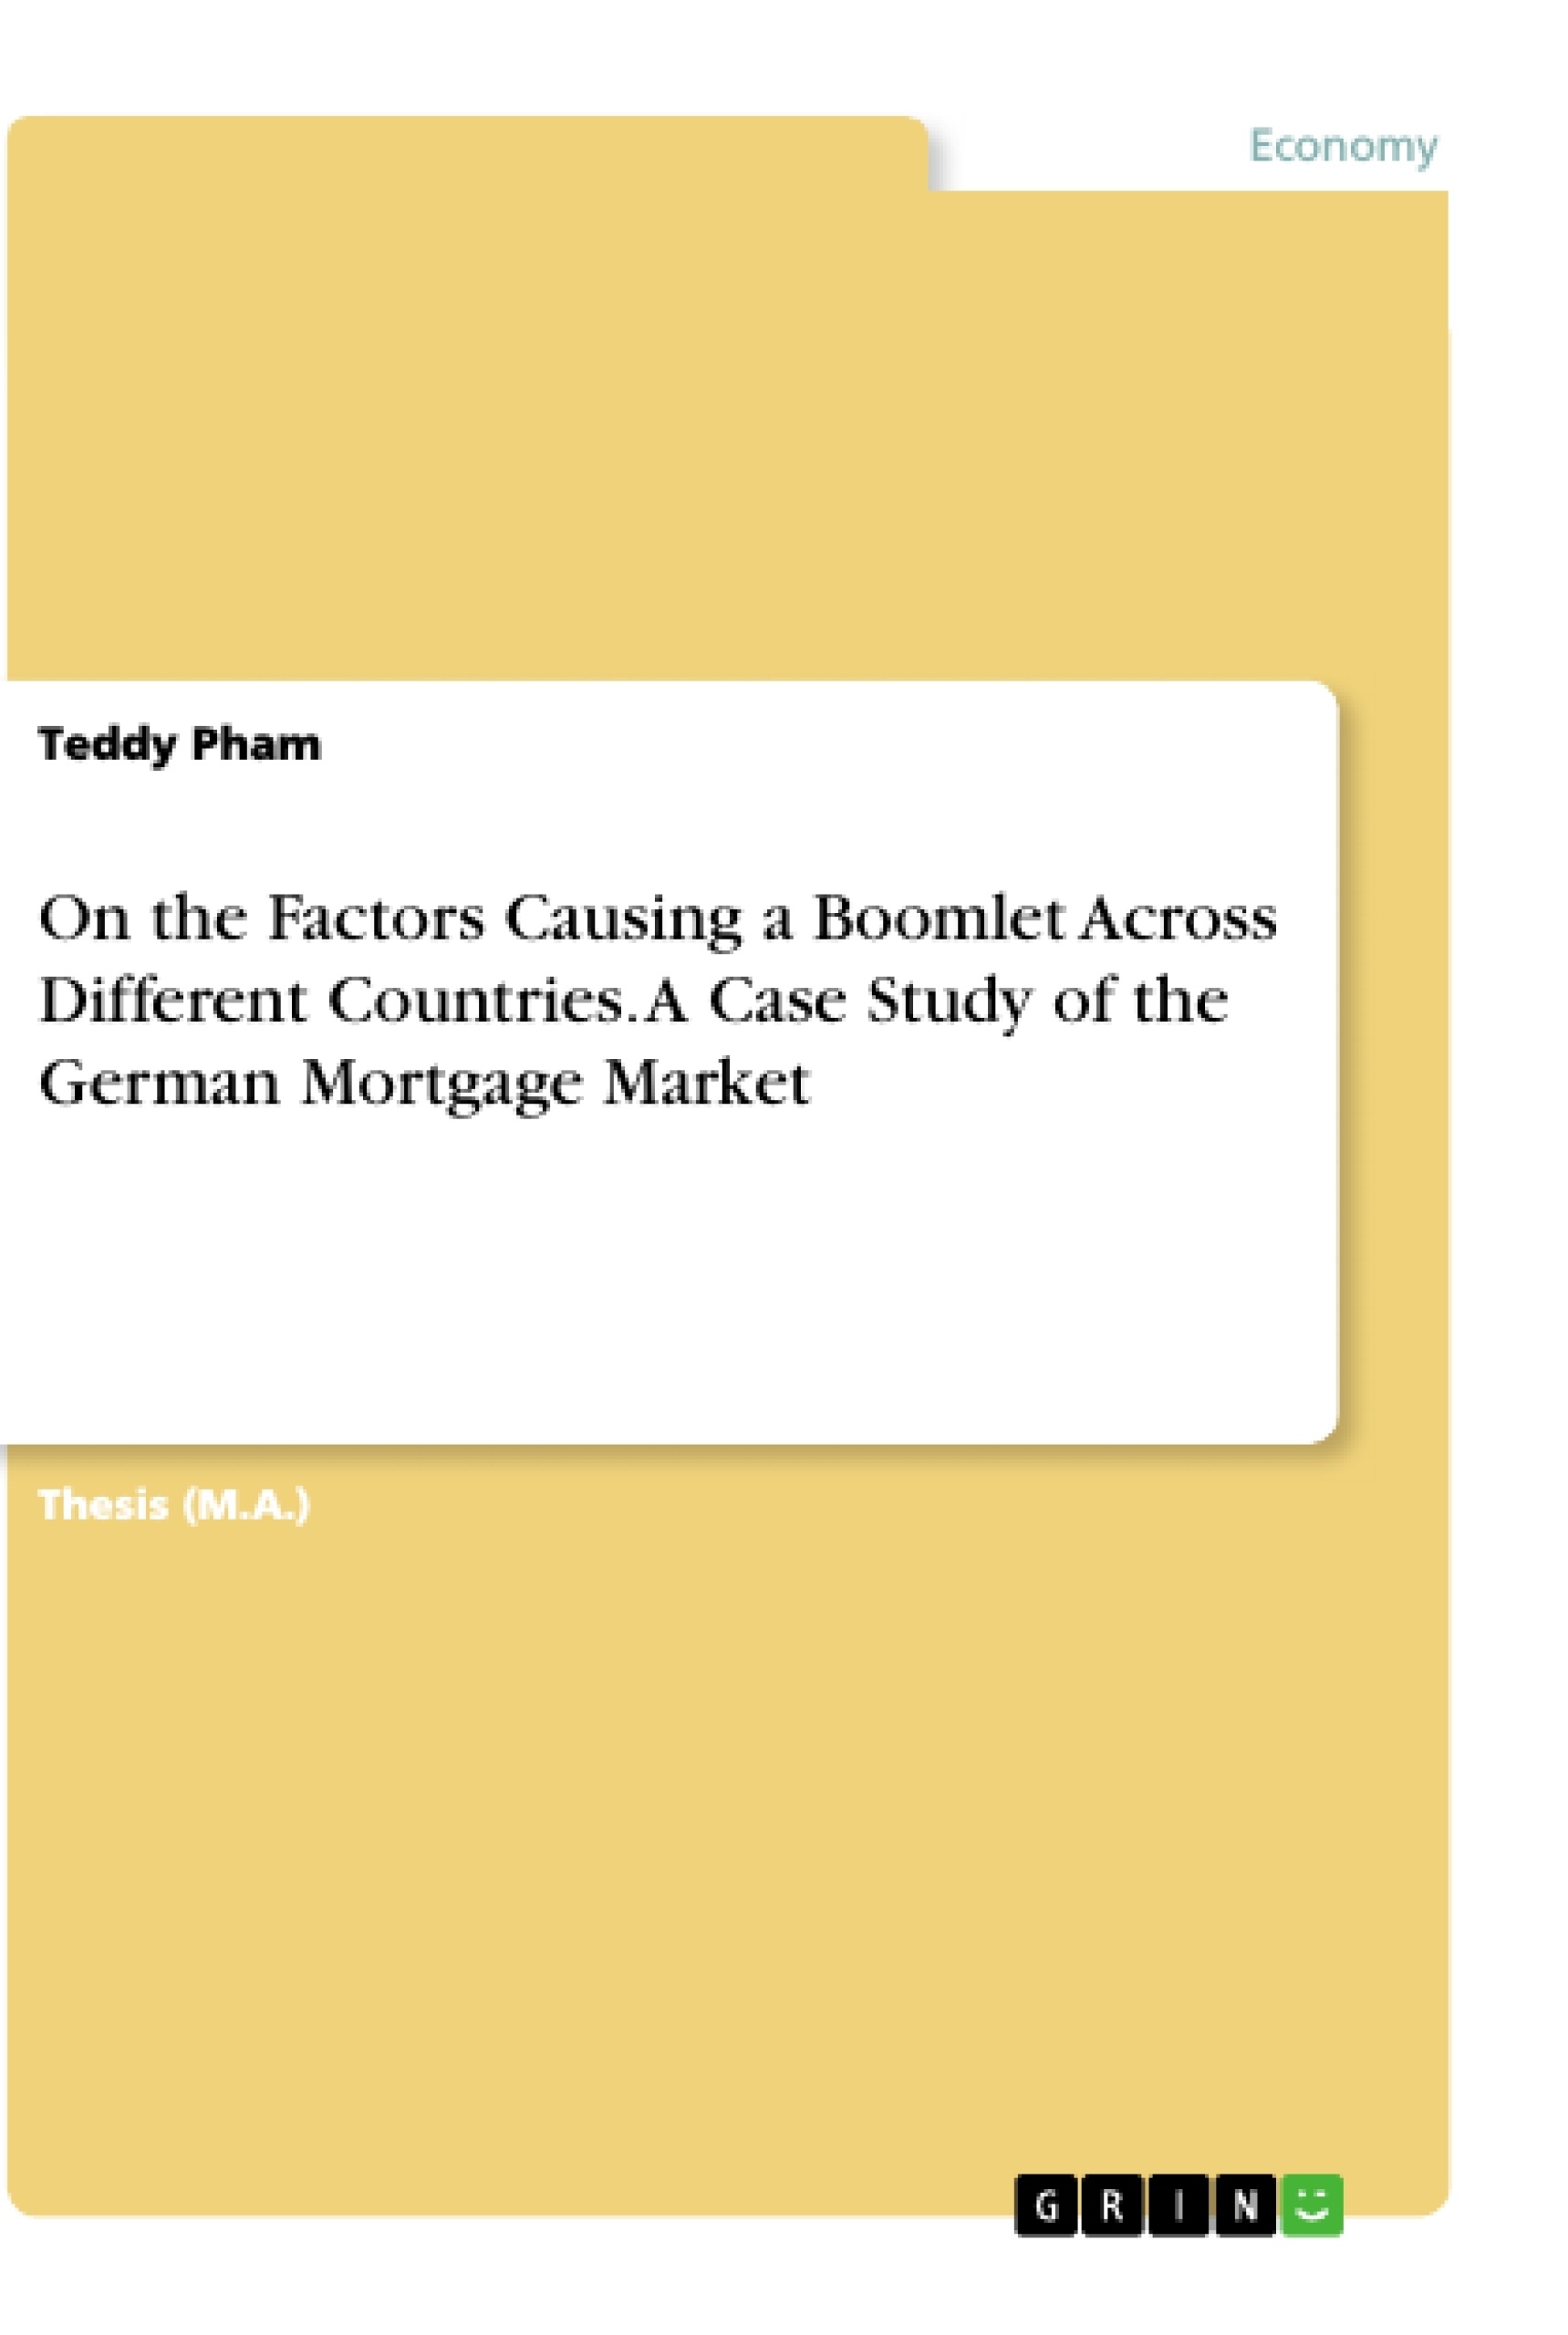 Titel: On the Factors Causing a Boomlet Across Different Countries. A Case Study of the German Mortgage Market